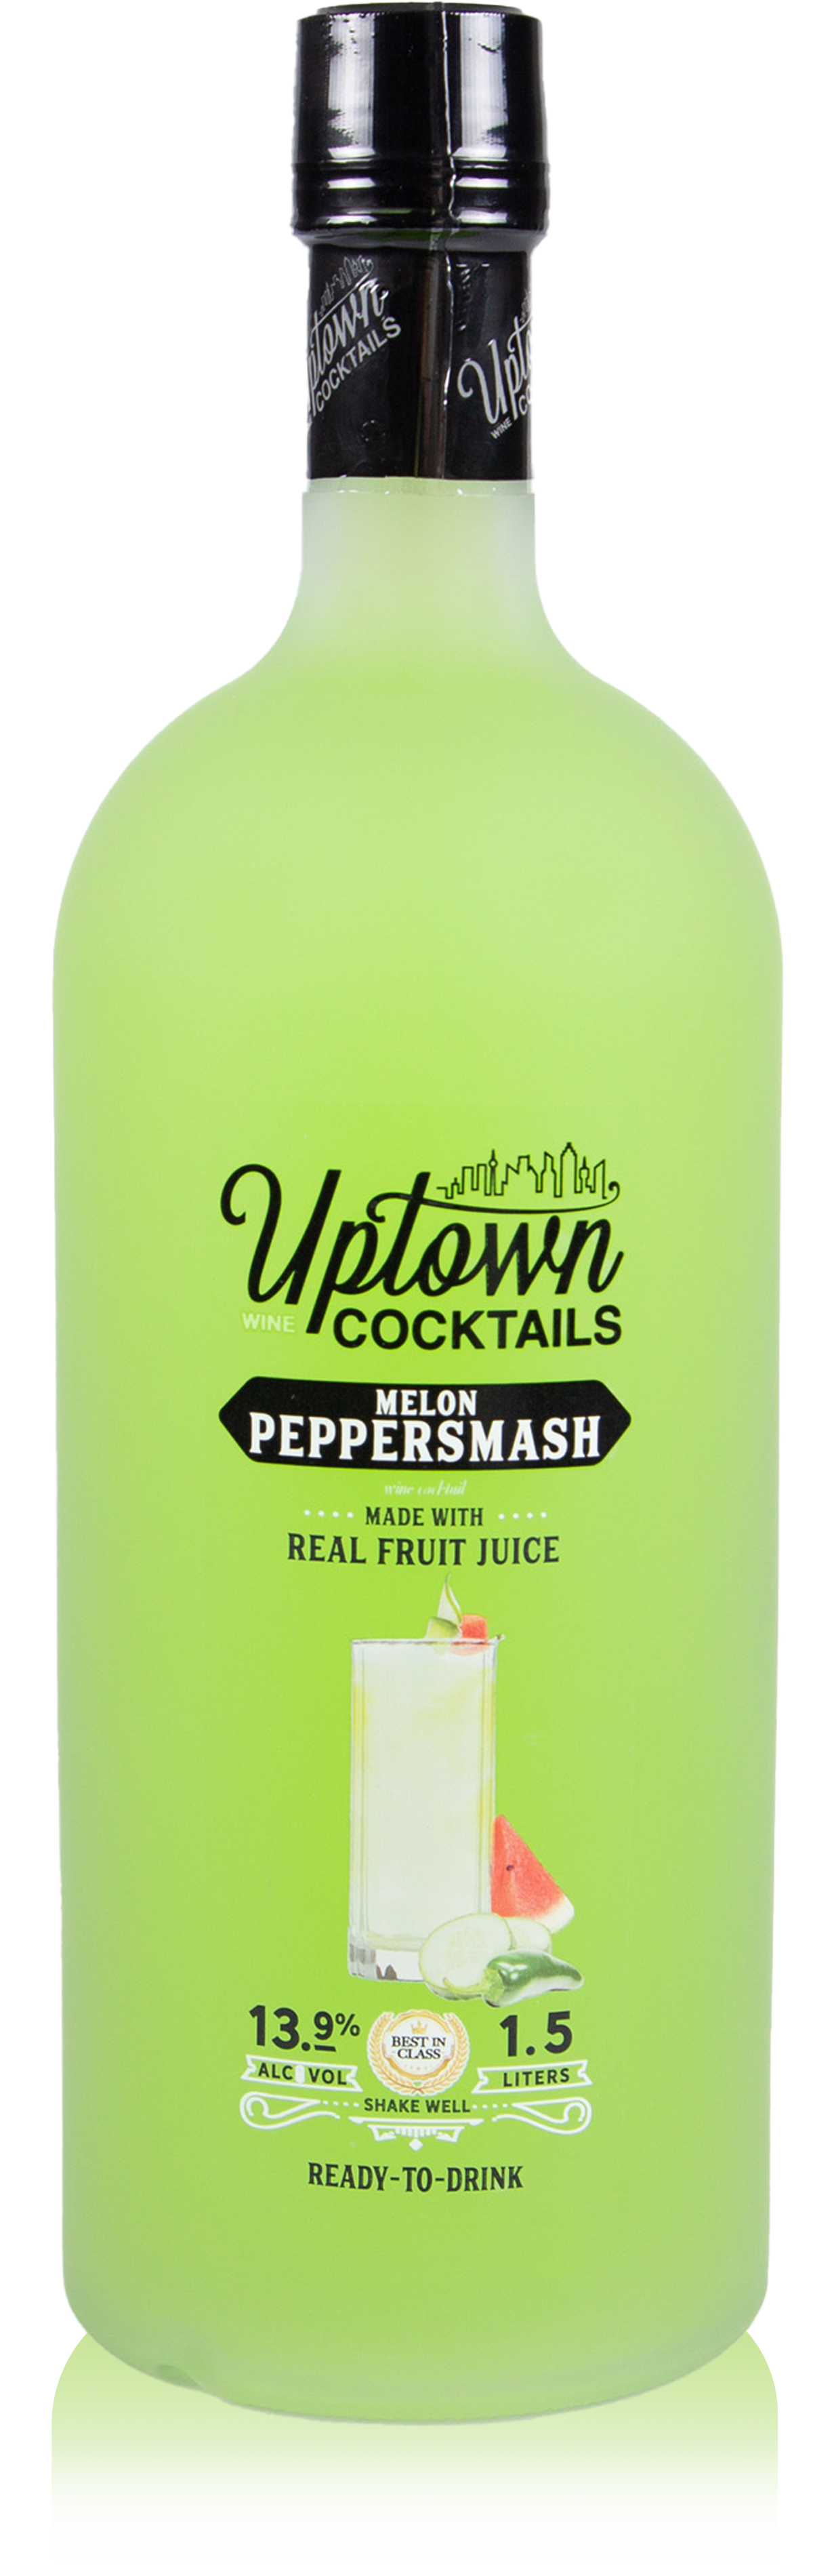 Product Image for Melon Peppersmash